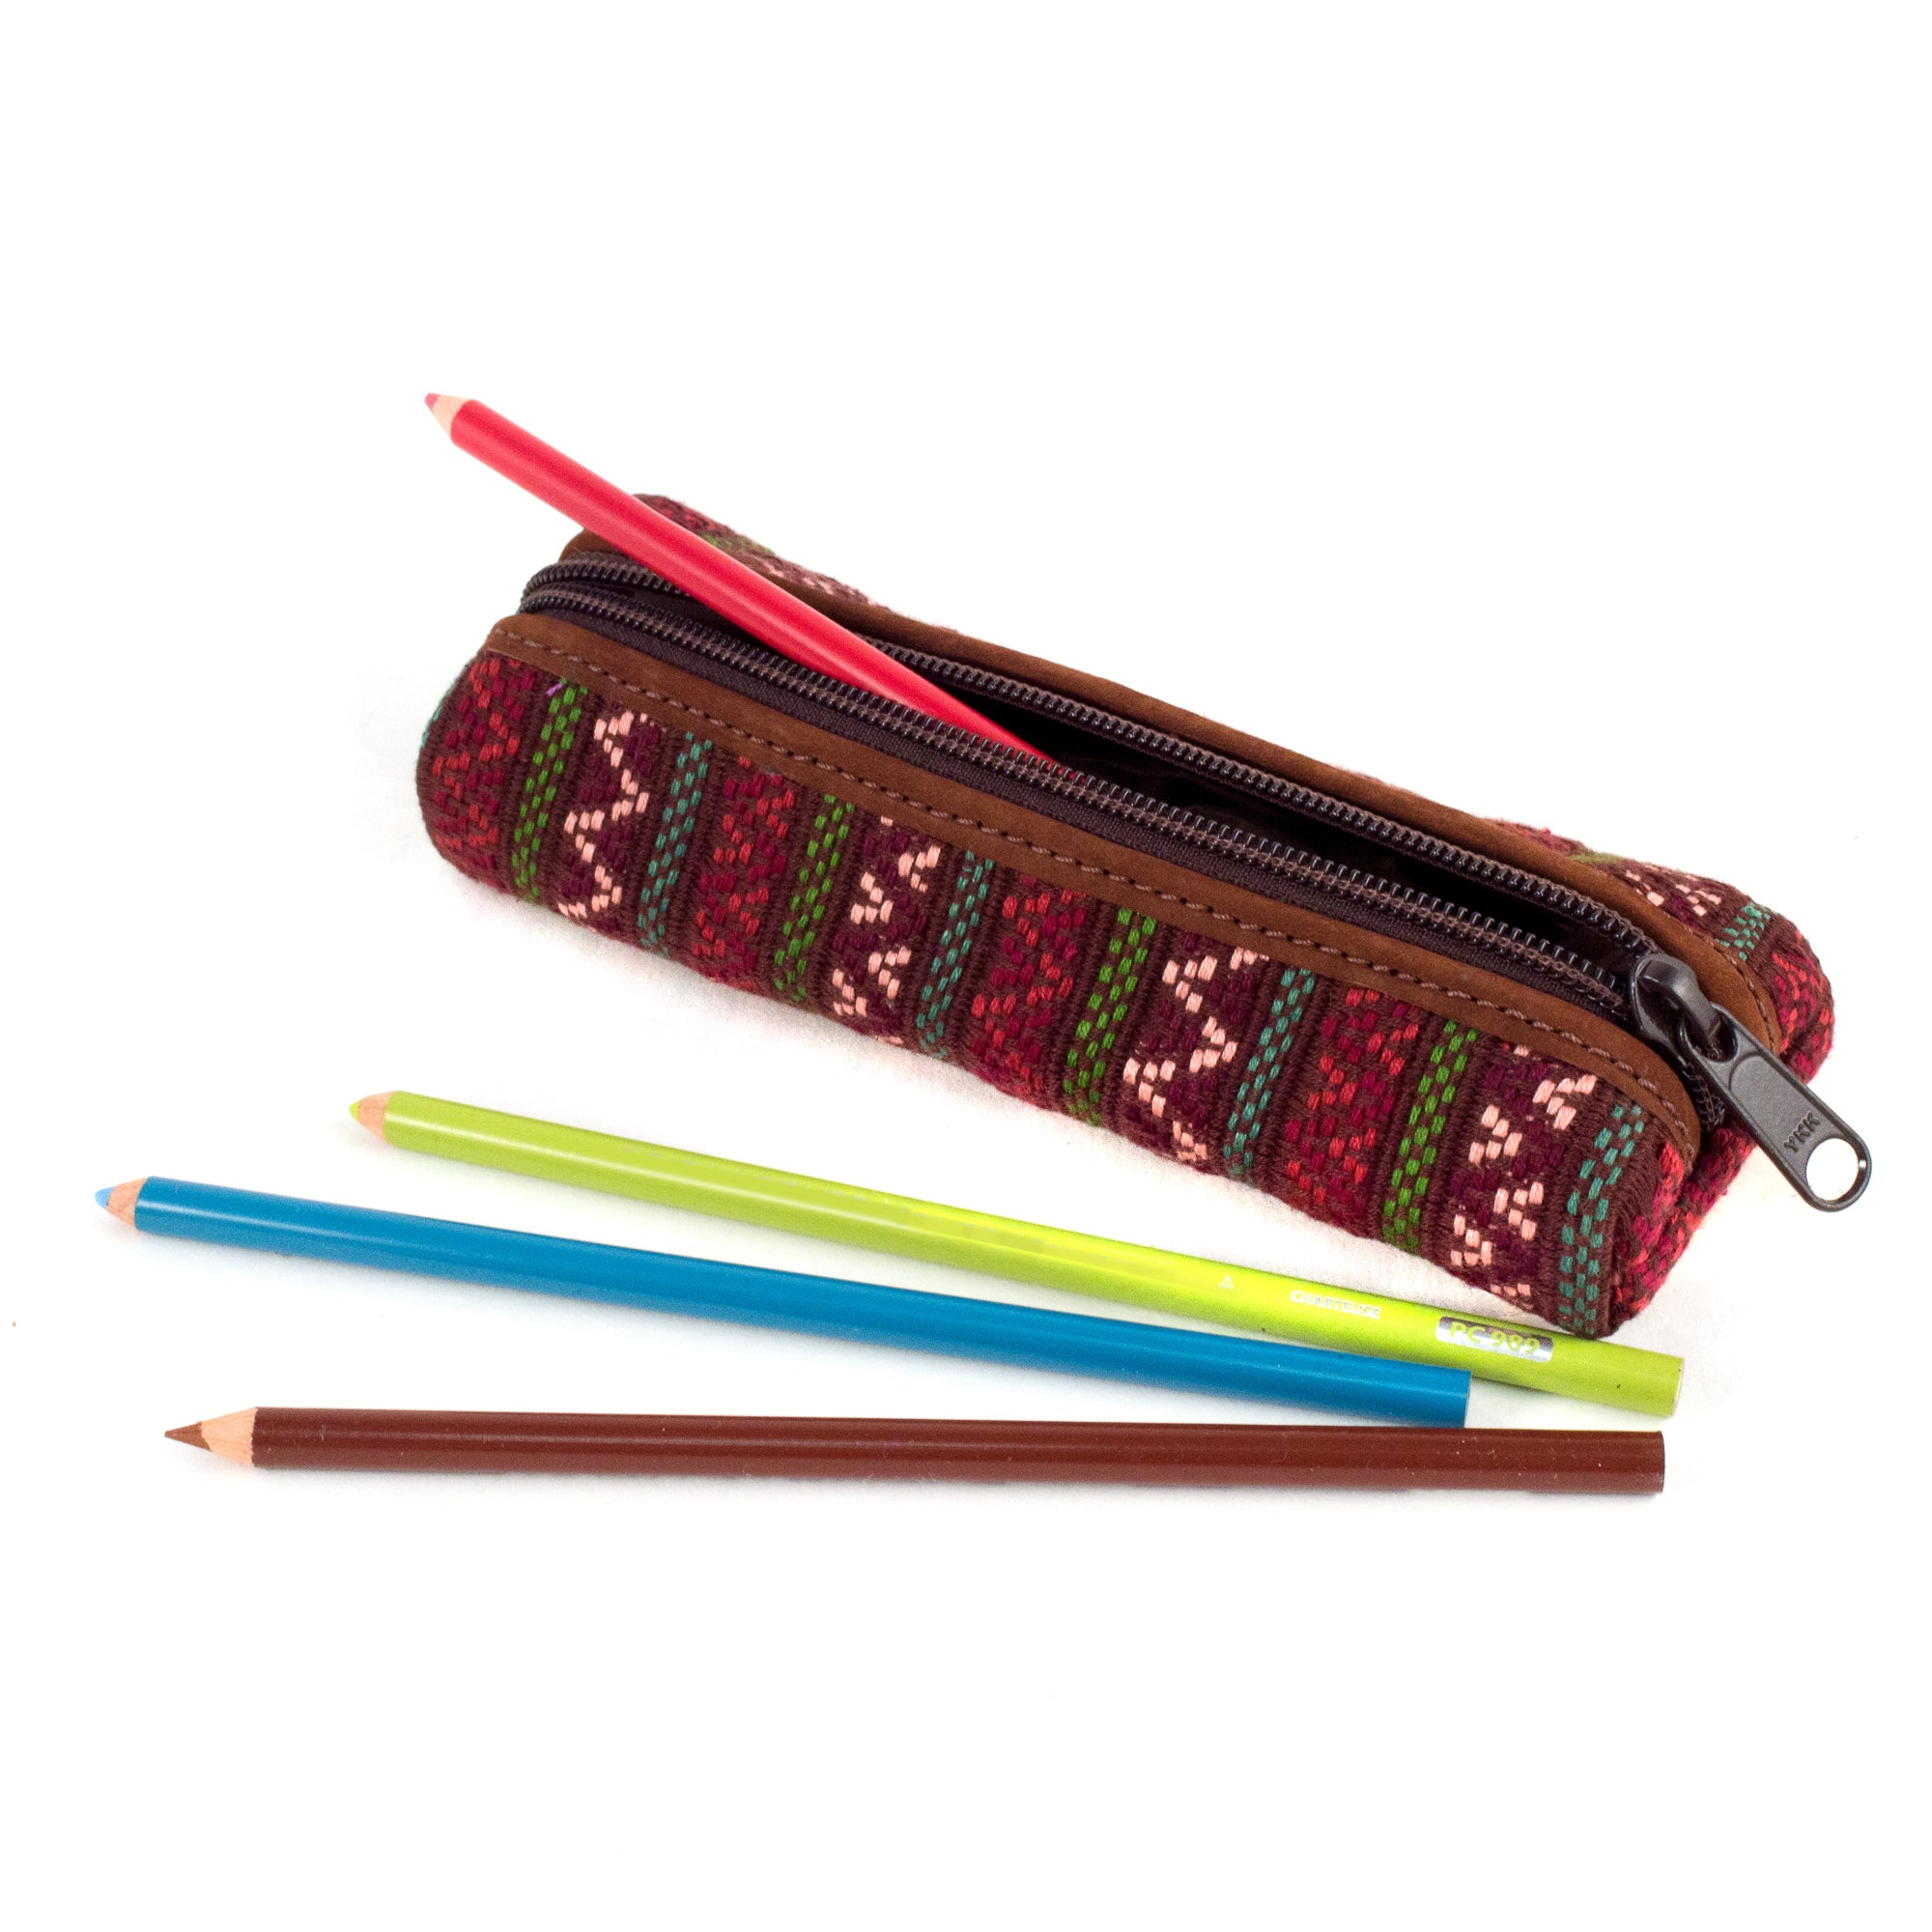 Large Hand Woven and Embroidered Pencil Bag - Hands of Guatemala